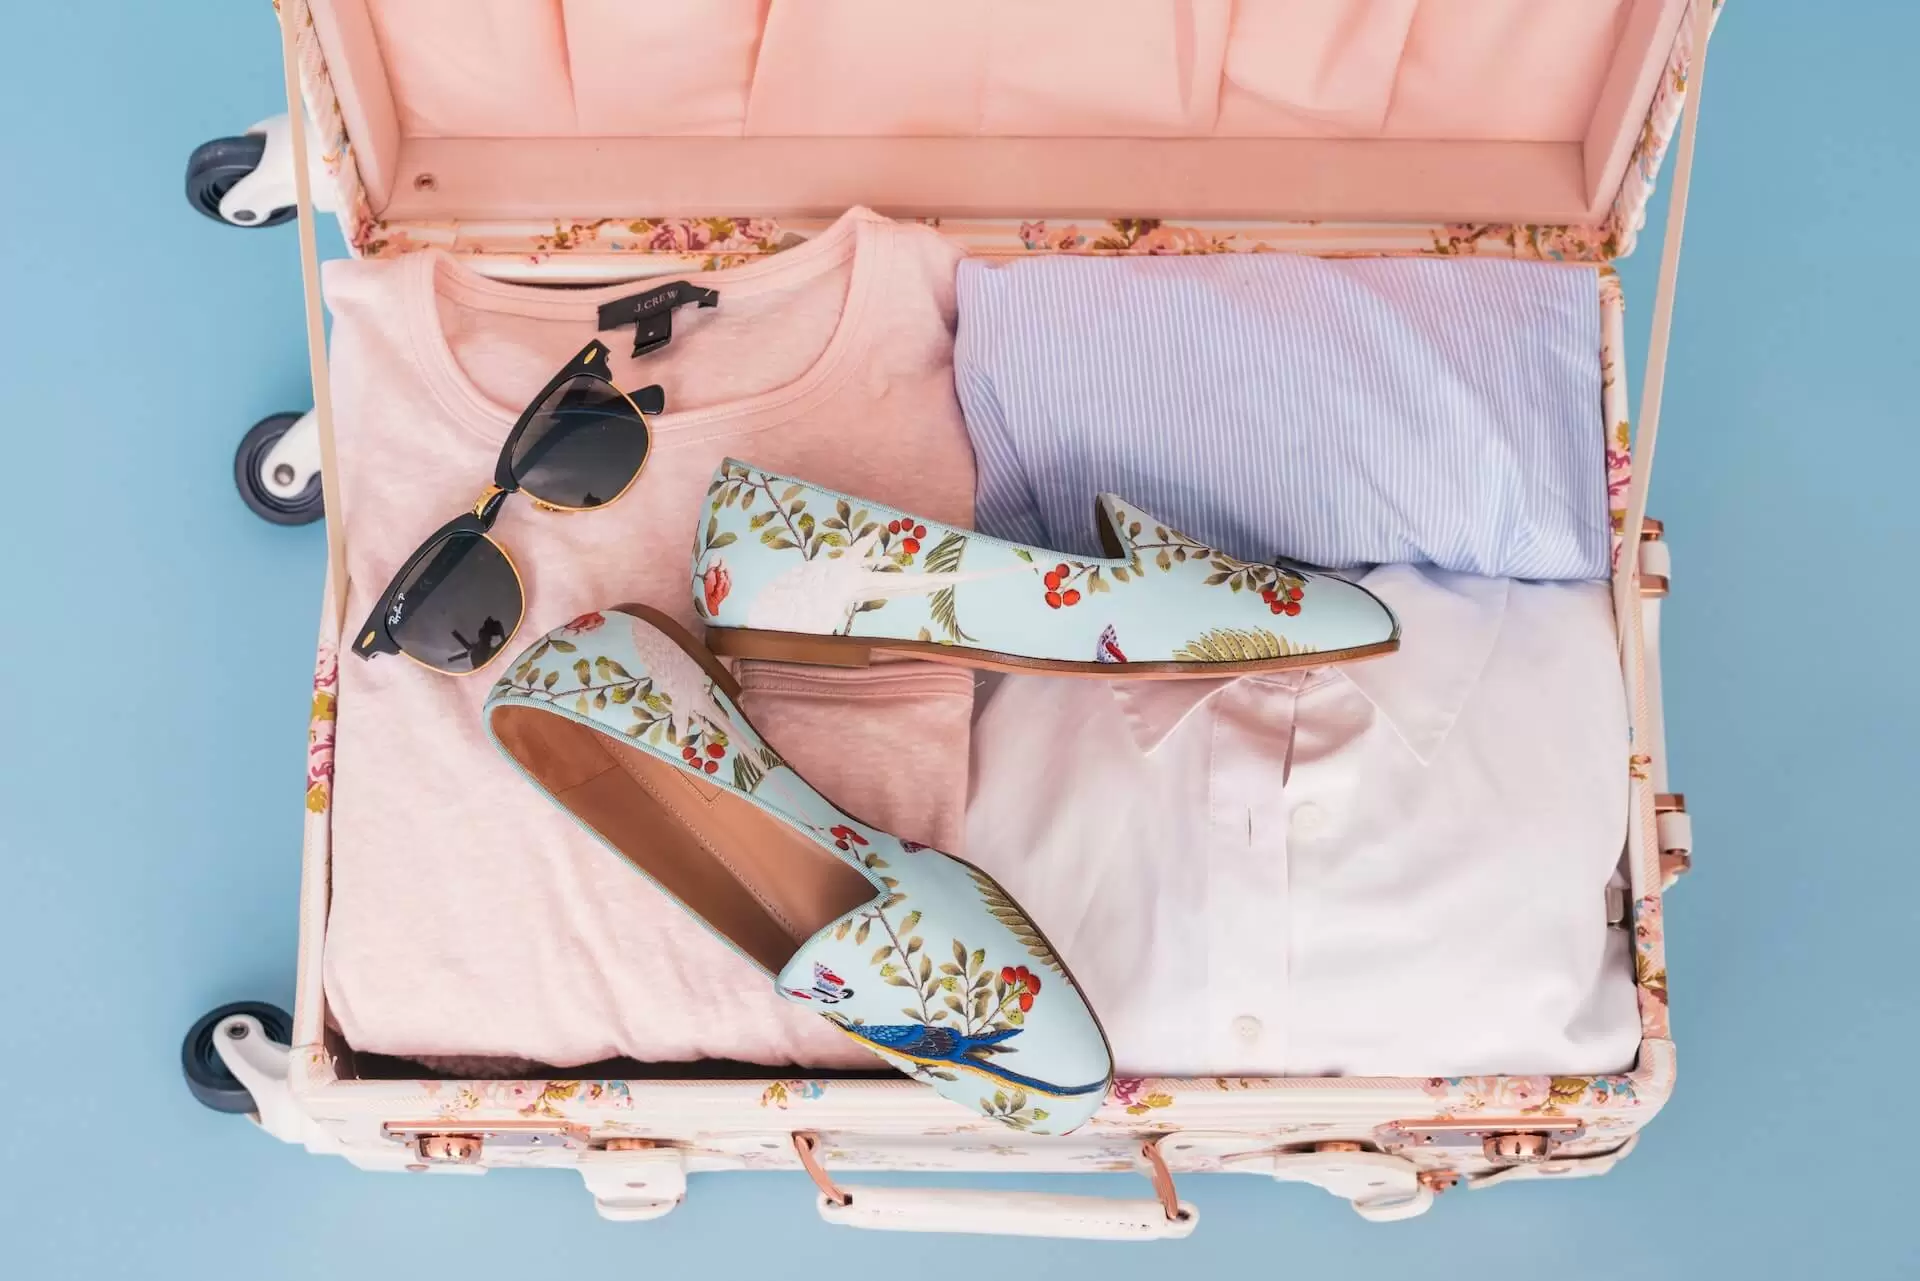 Sunglass, Pair of shoes, and a few cloths in a suitcase.